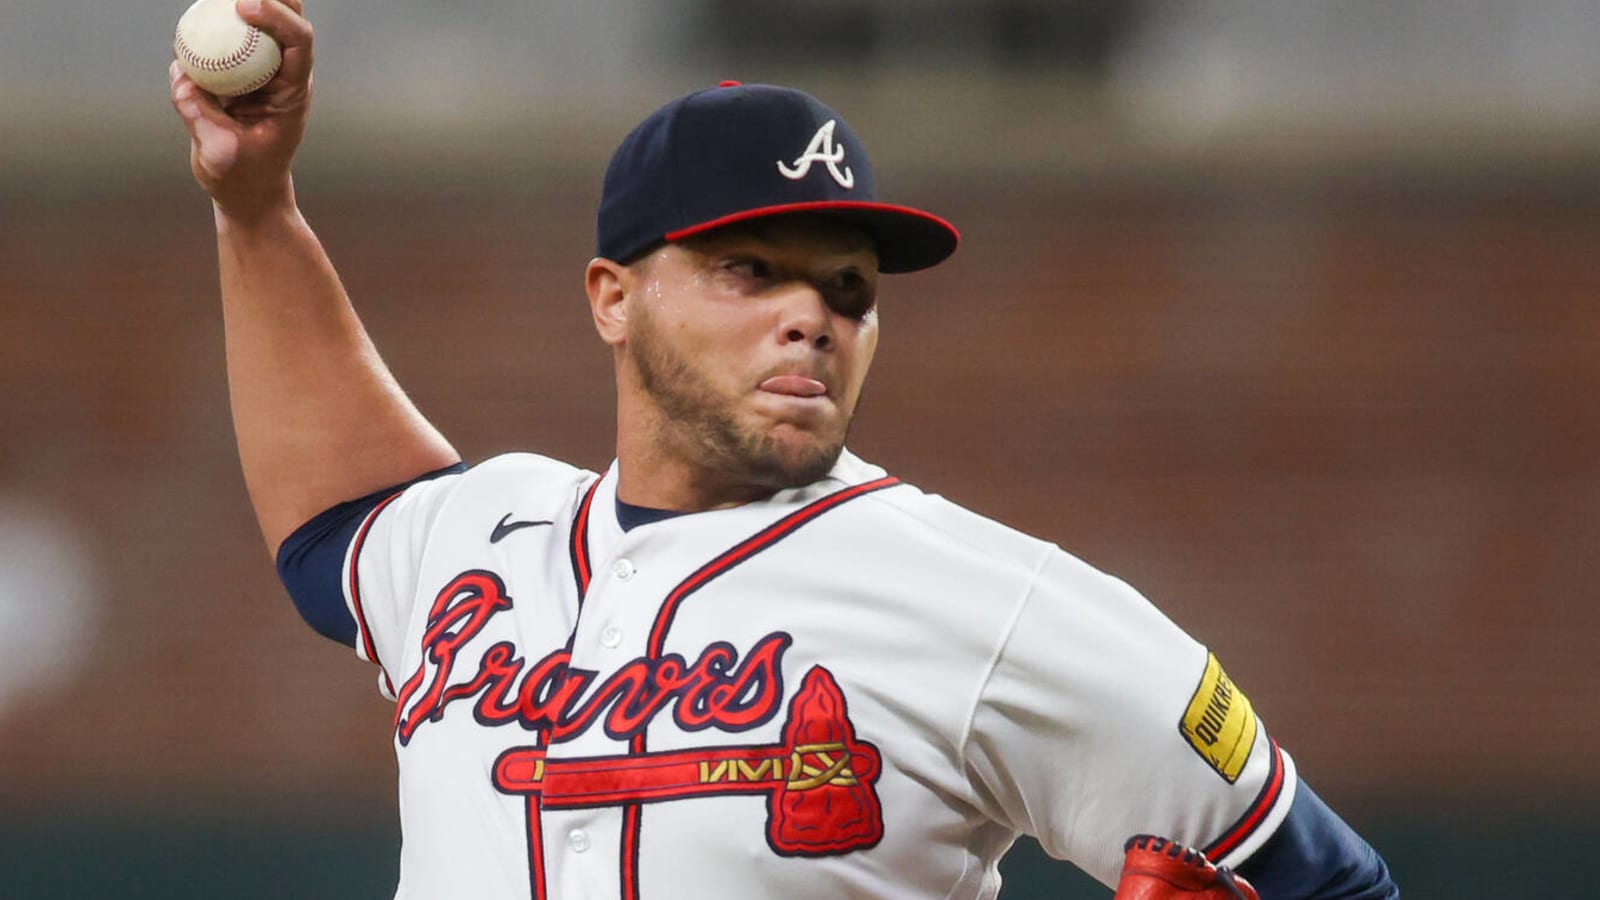 This trade from last offseason could come back to bite the Braves